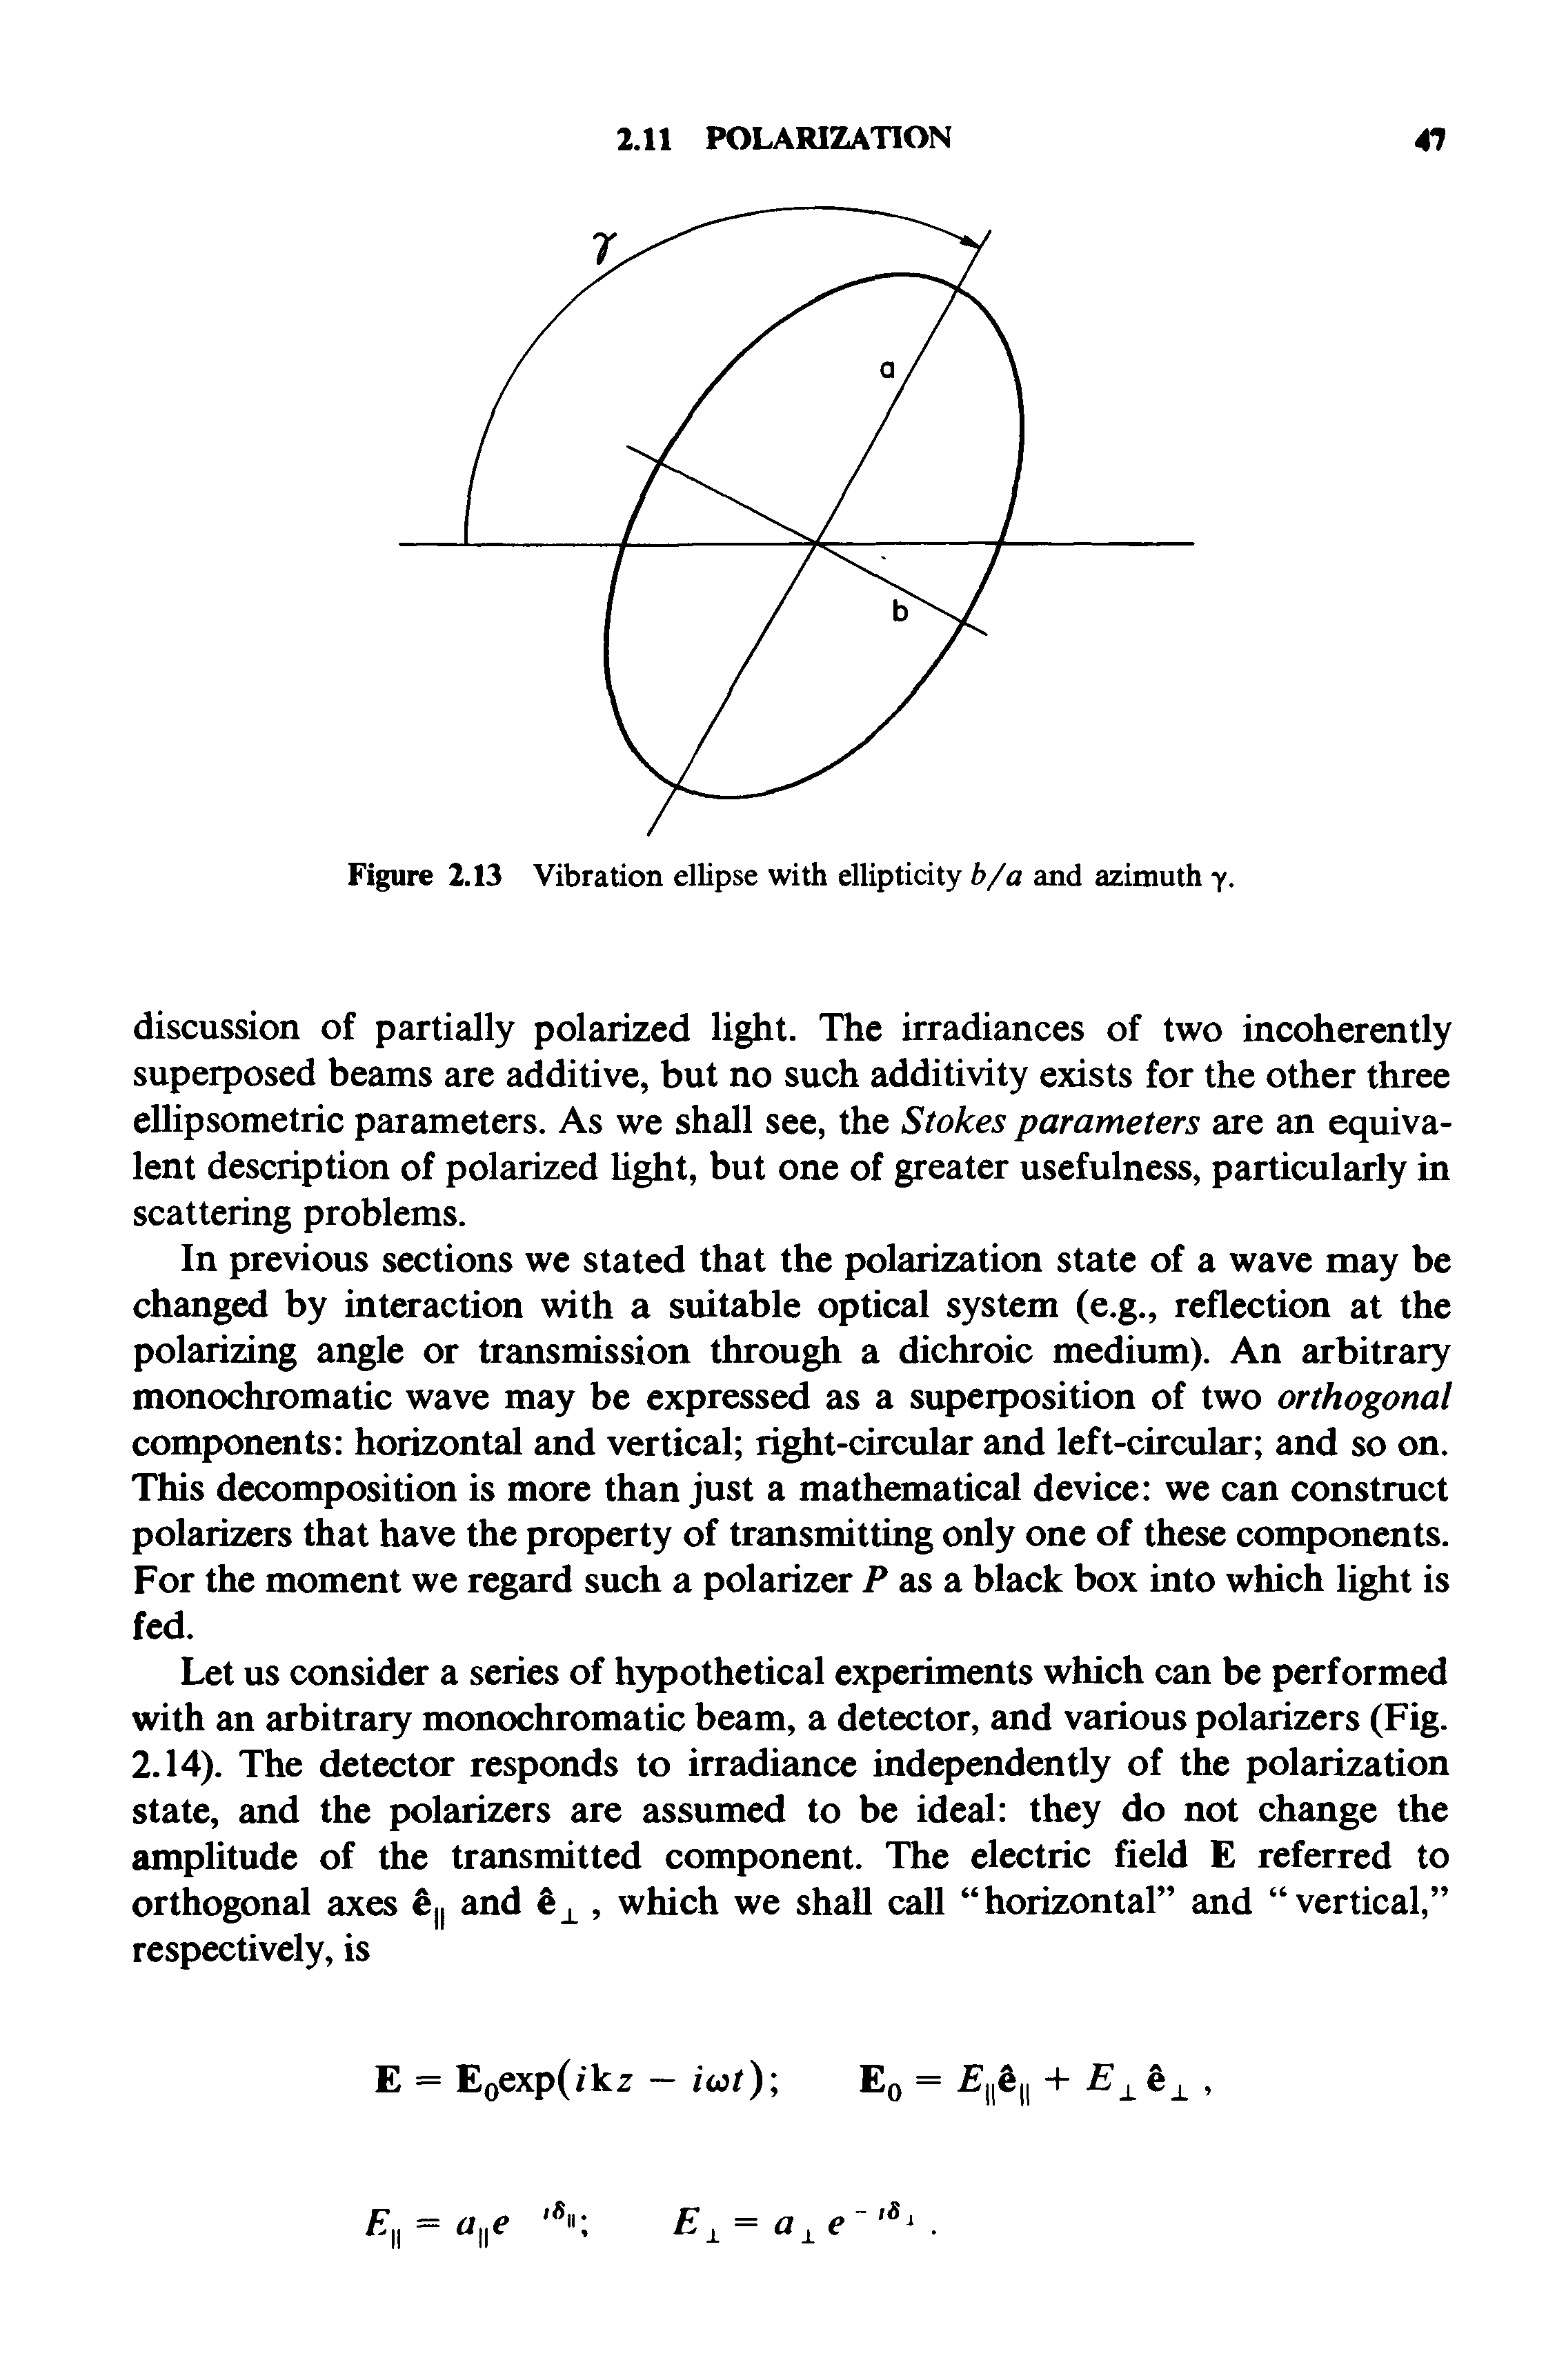 Figure 2.13 Vibration ellipse with ellipticity b/a and azimuth y.